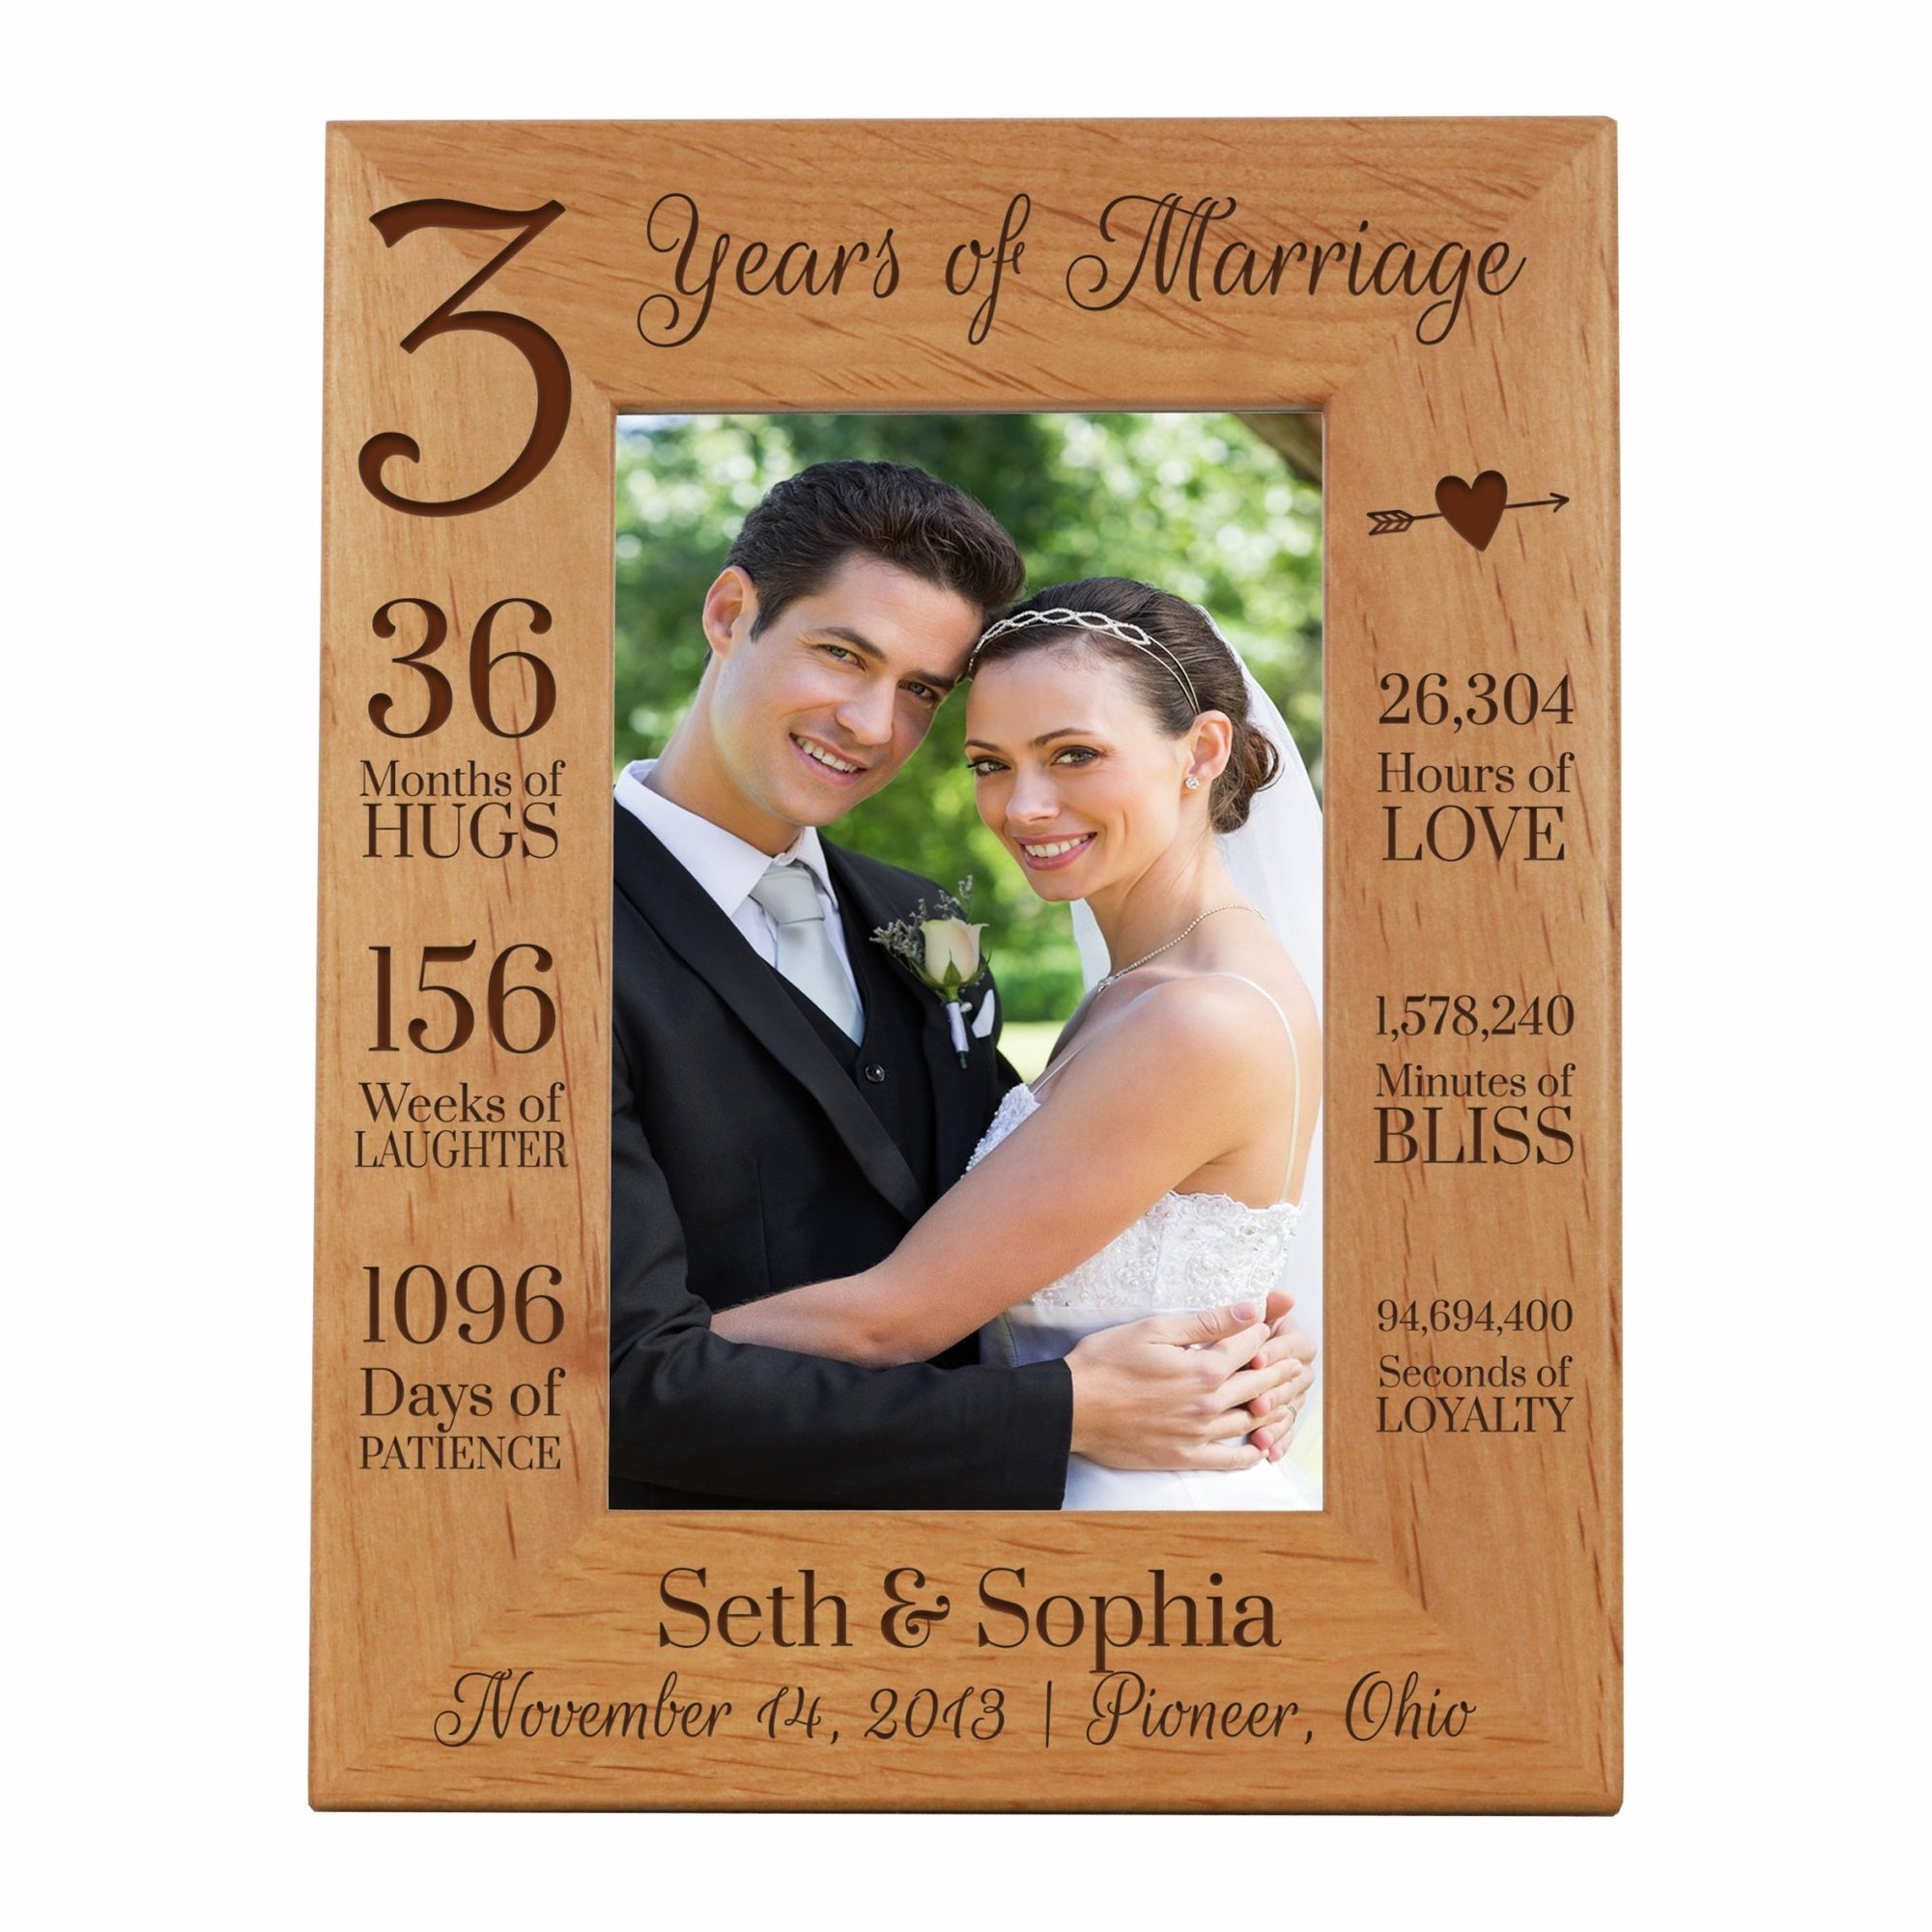 Lifesong Milestones Personalized Engraved 3rd Anniversary Photo Frame Gift for Couples